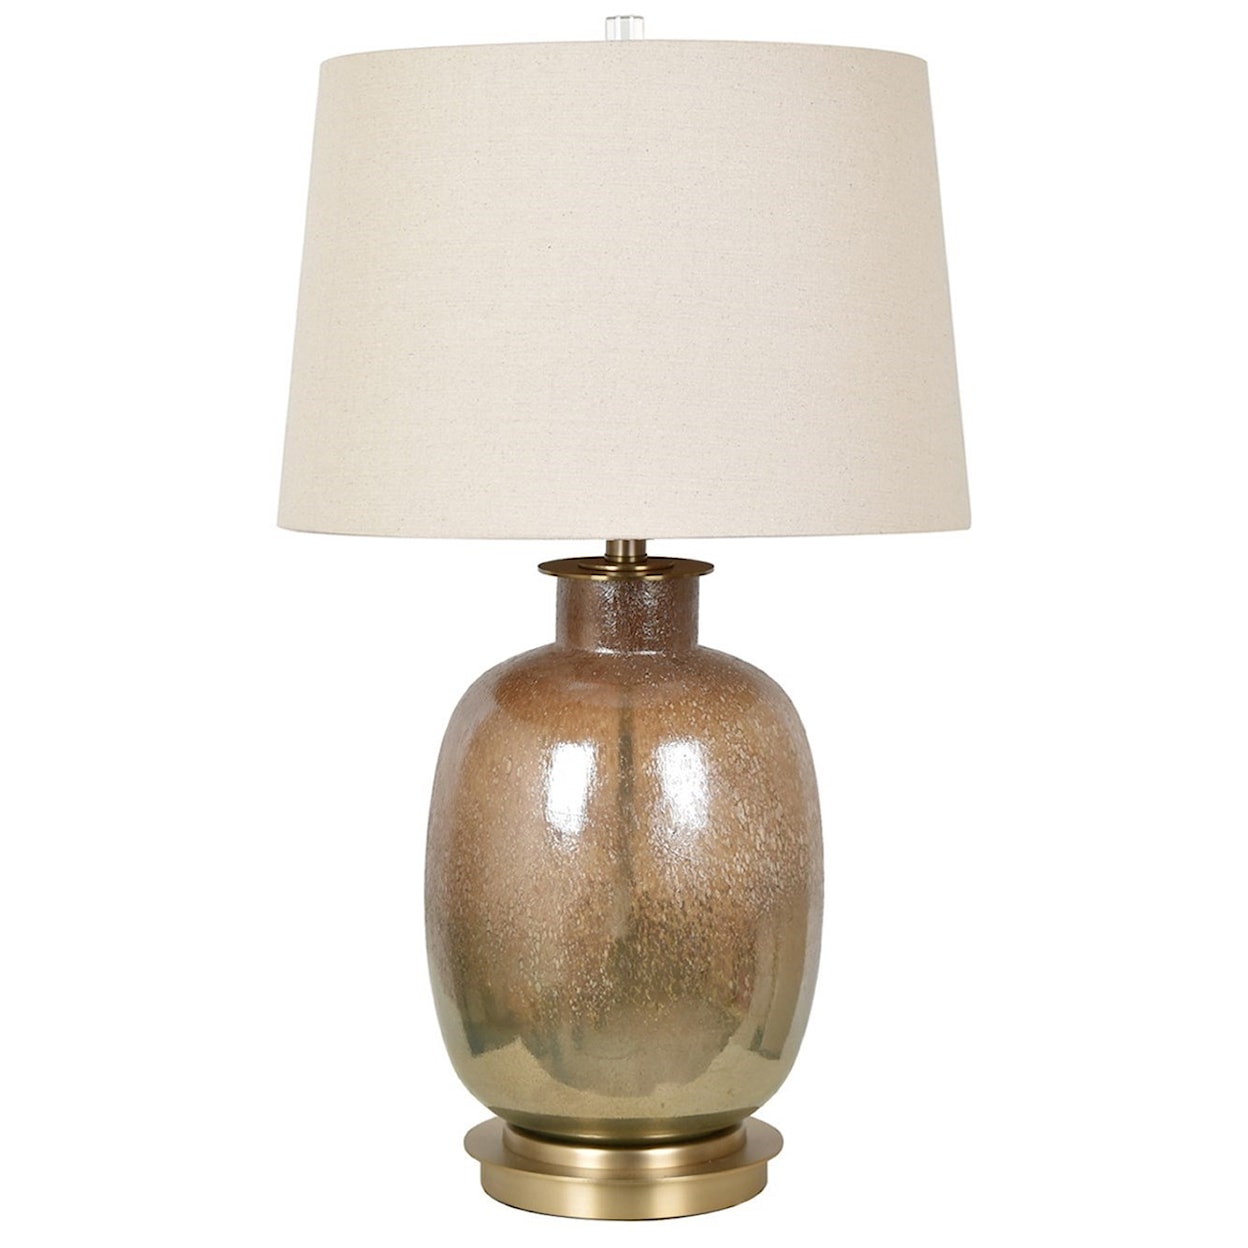 Crestview Collection Lighting Charlotte Table Lamp